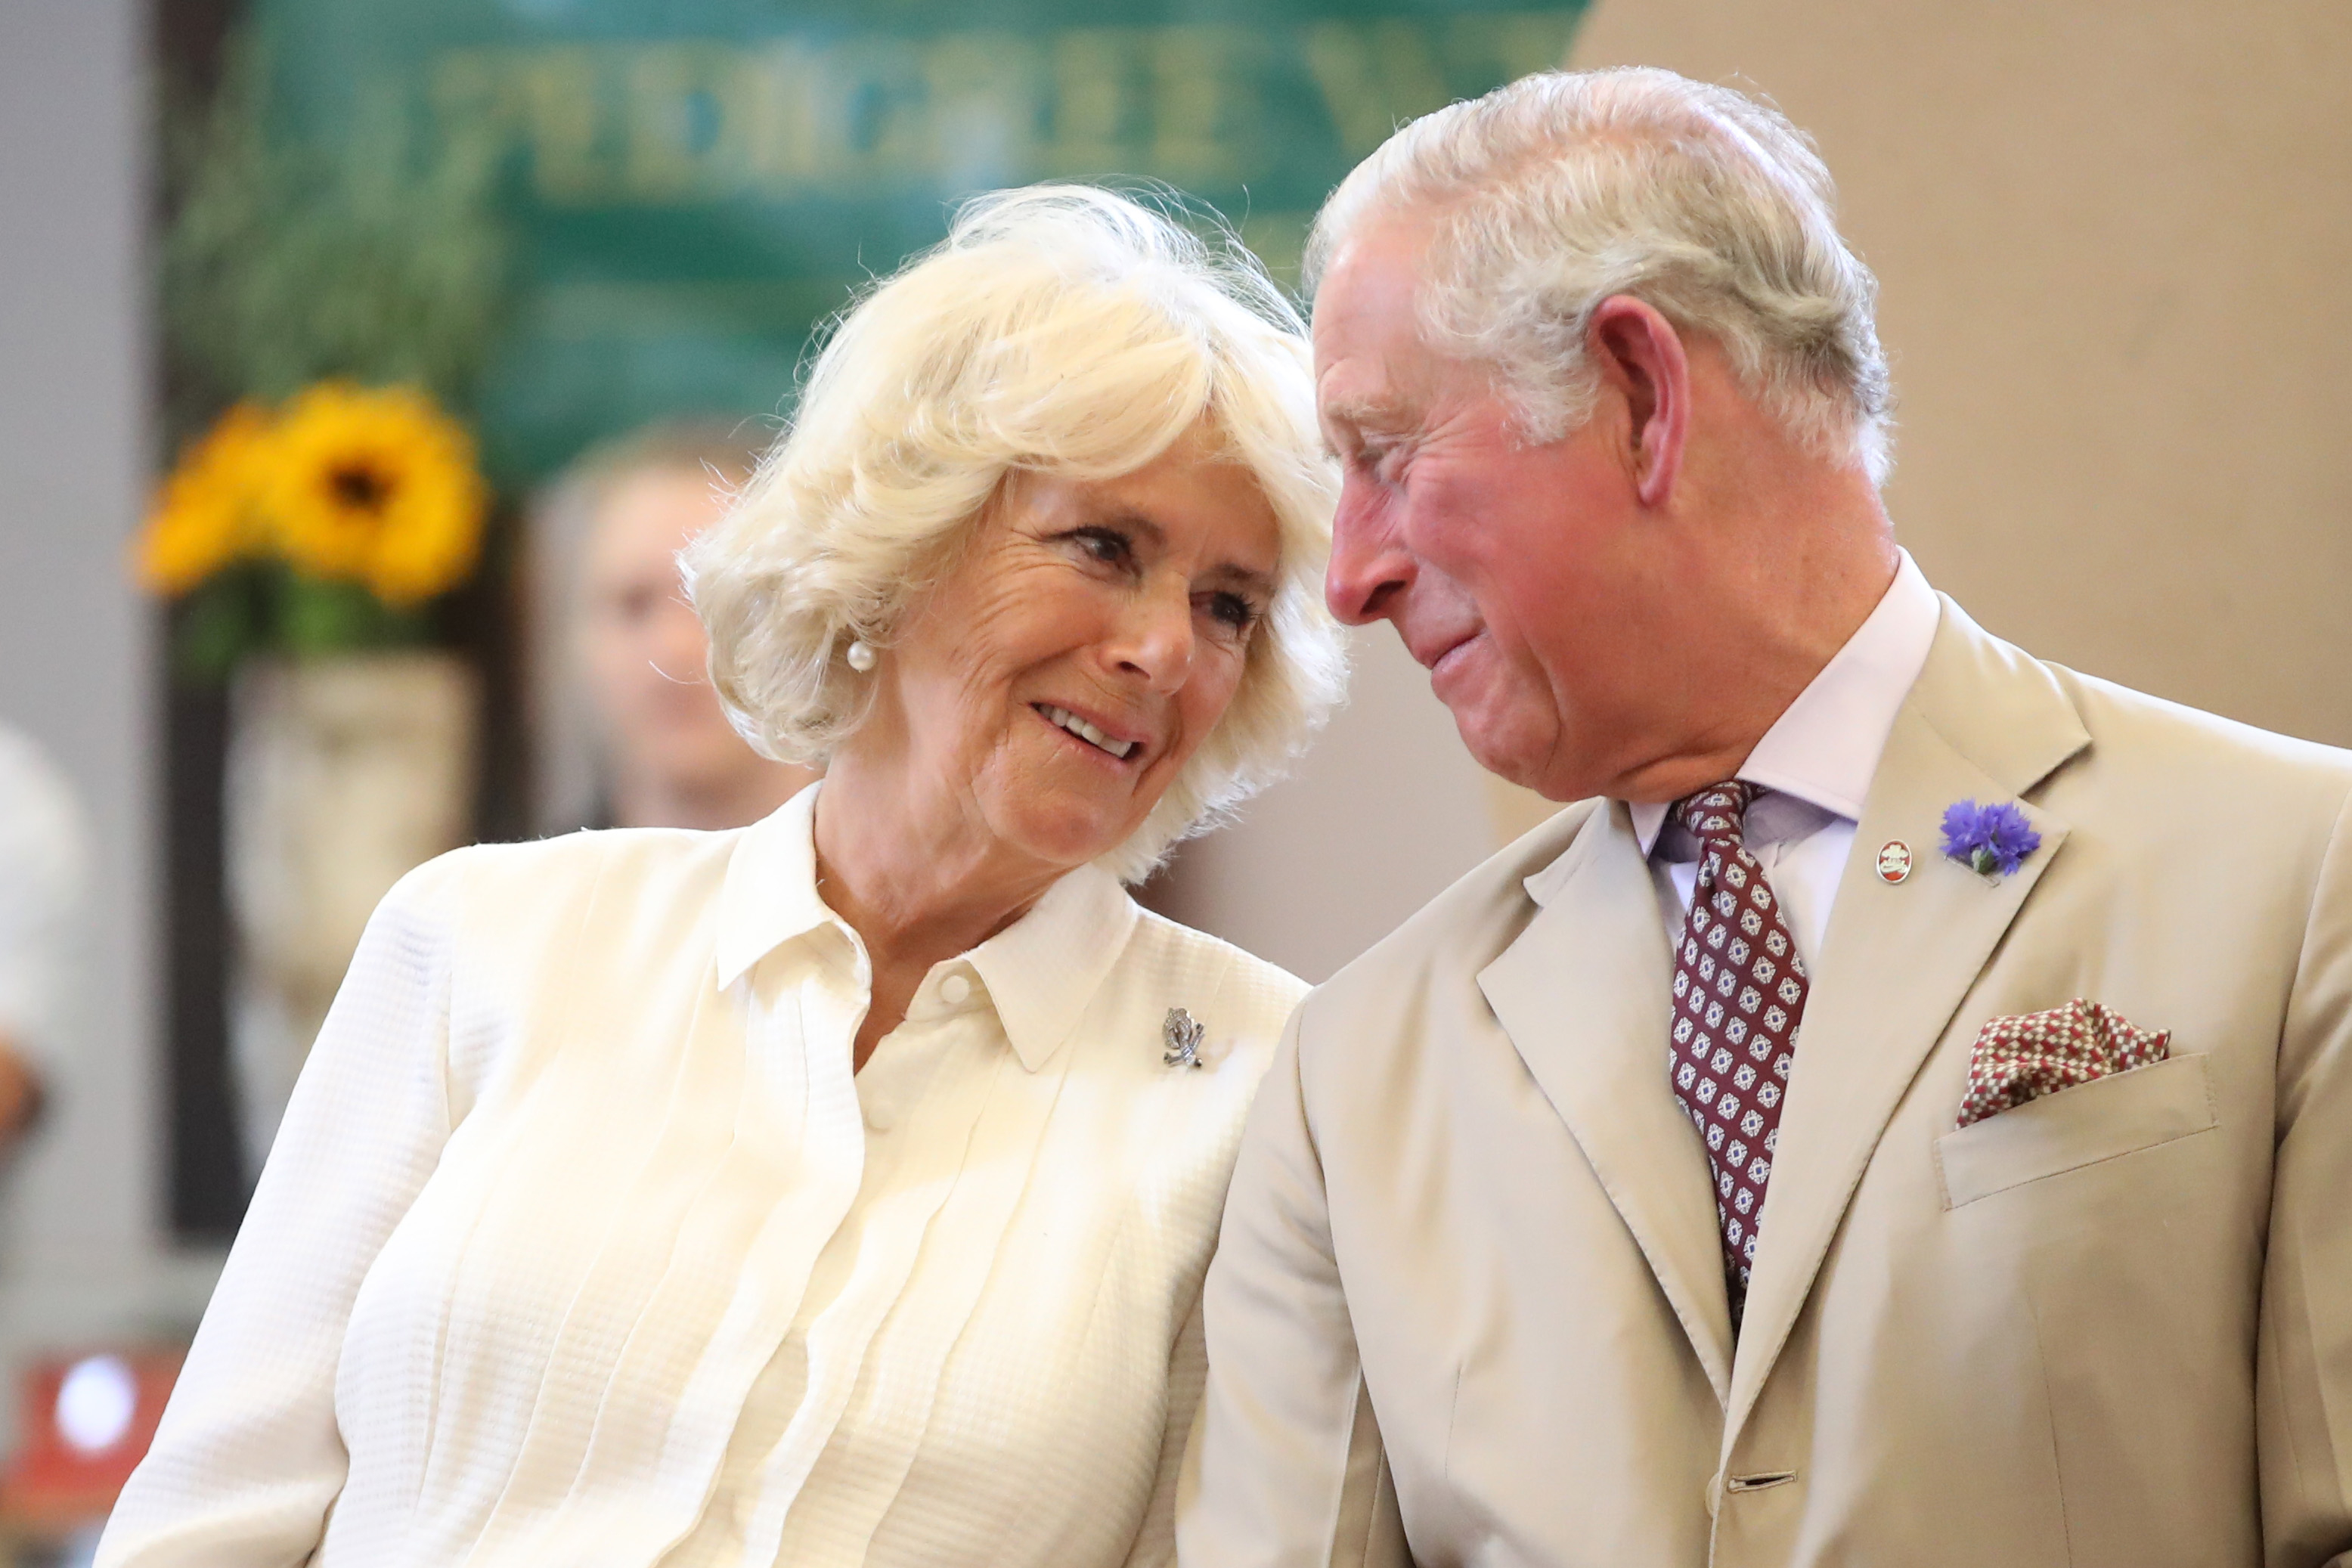 Prince Charles and Camilla Parker Bowles look at each other as they reopen a newly-renovated community hall